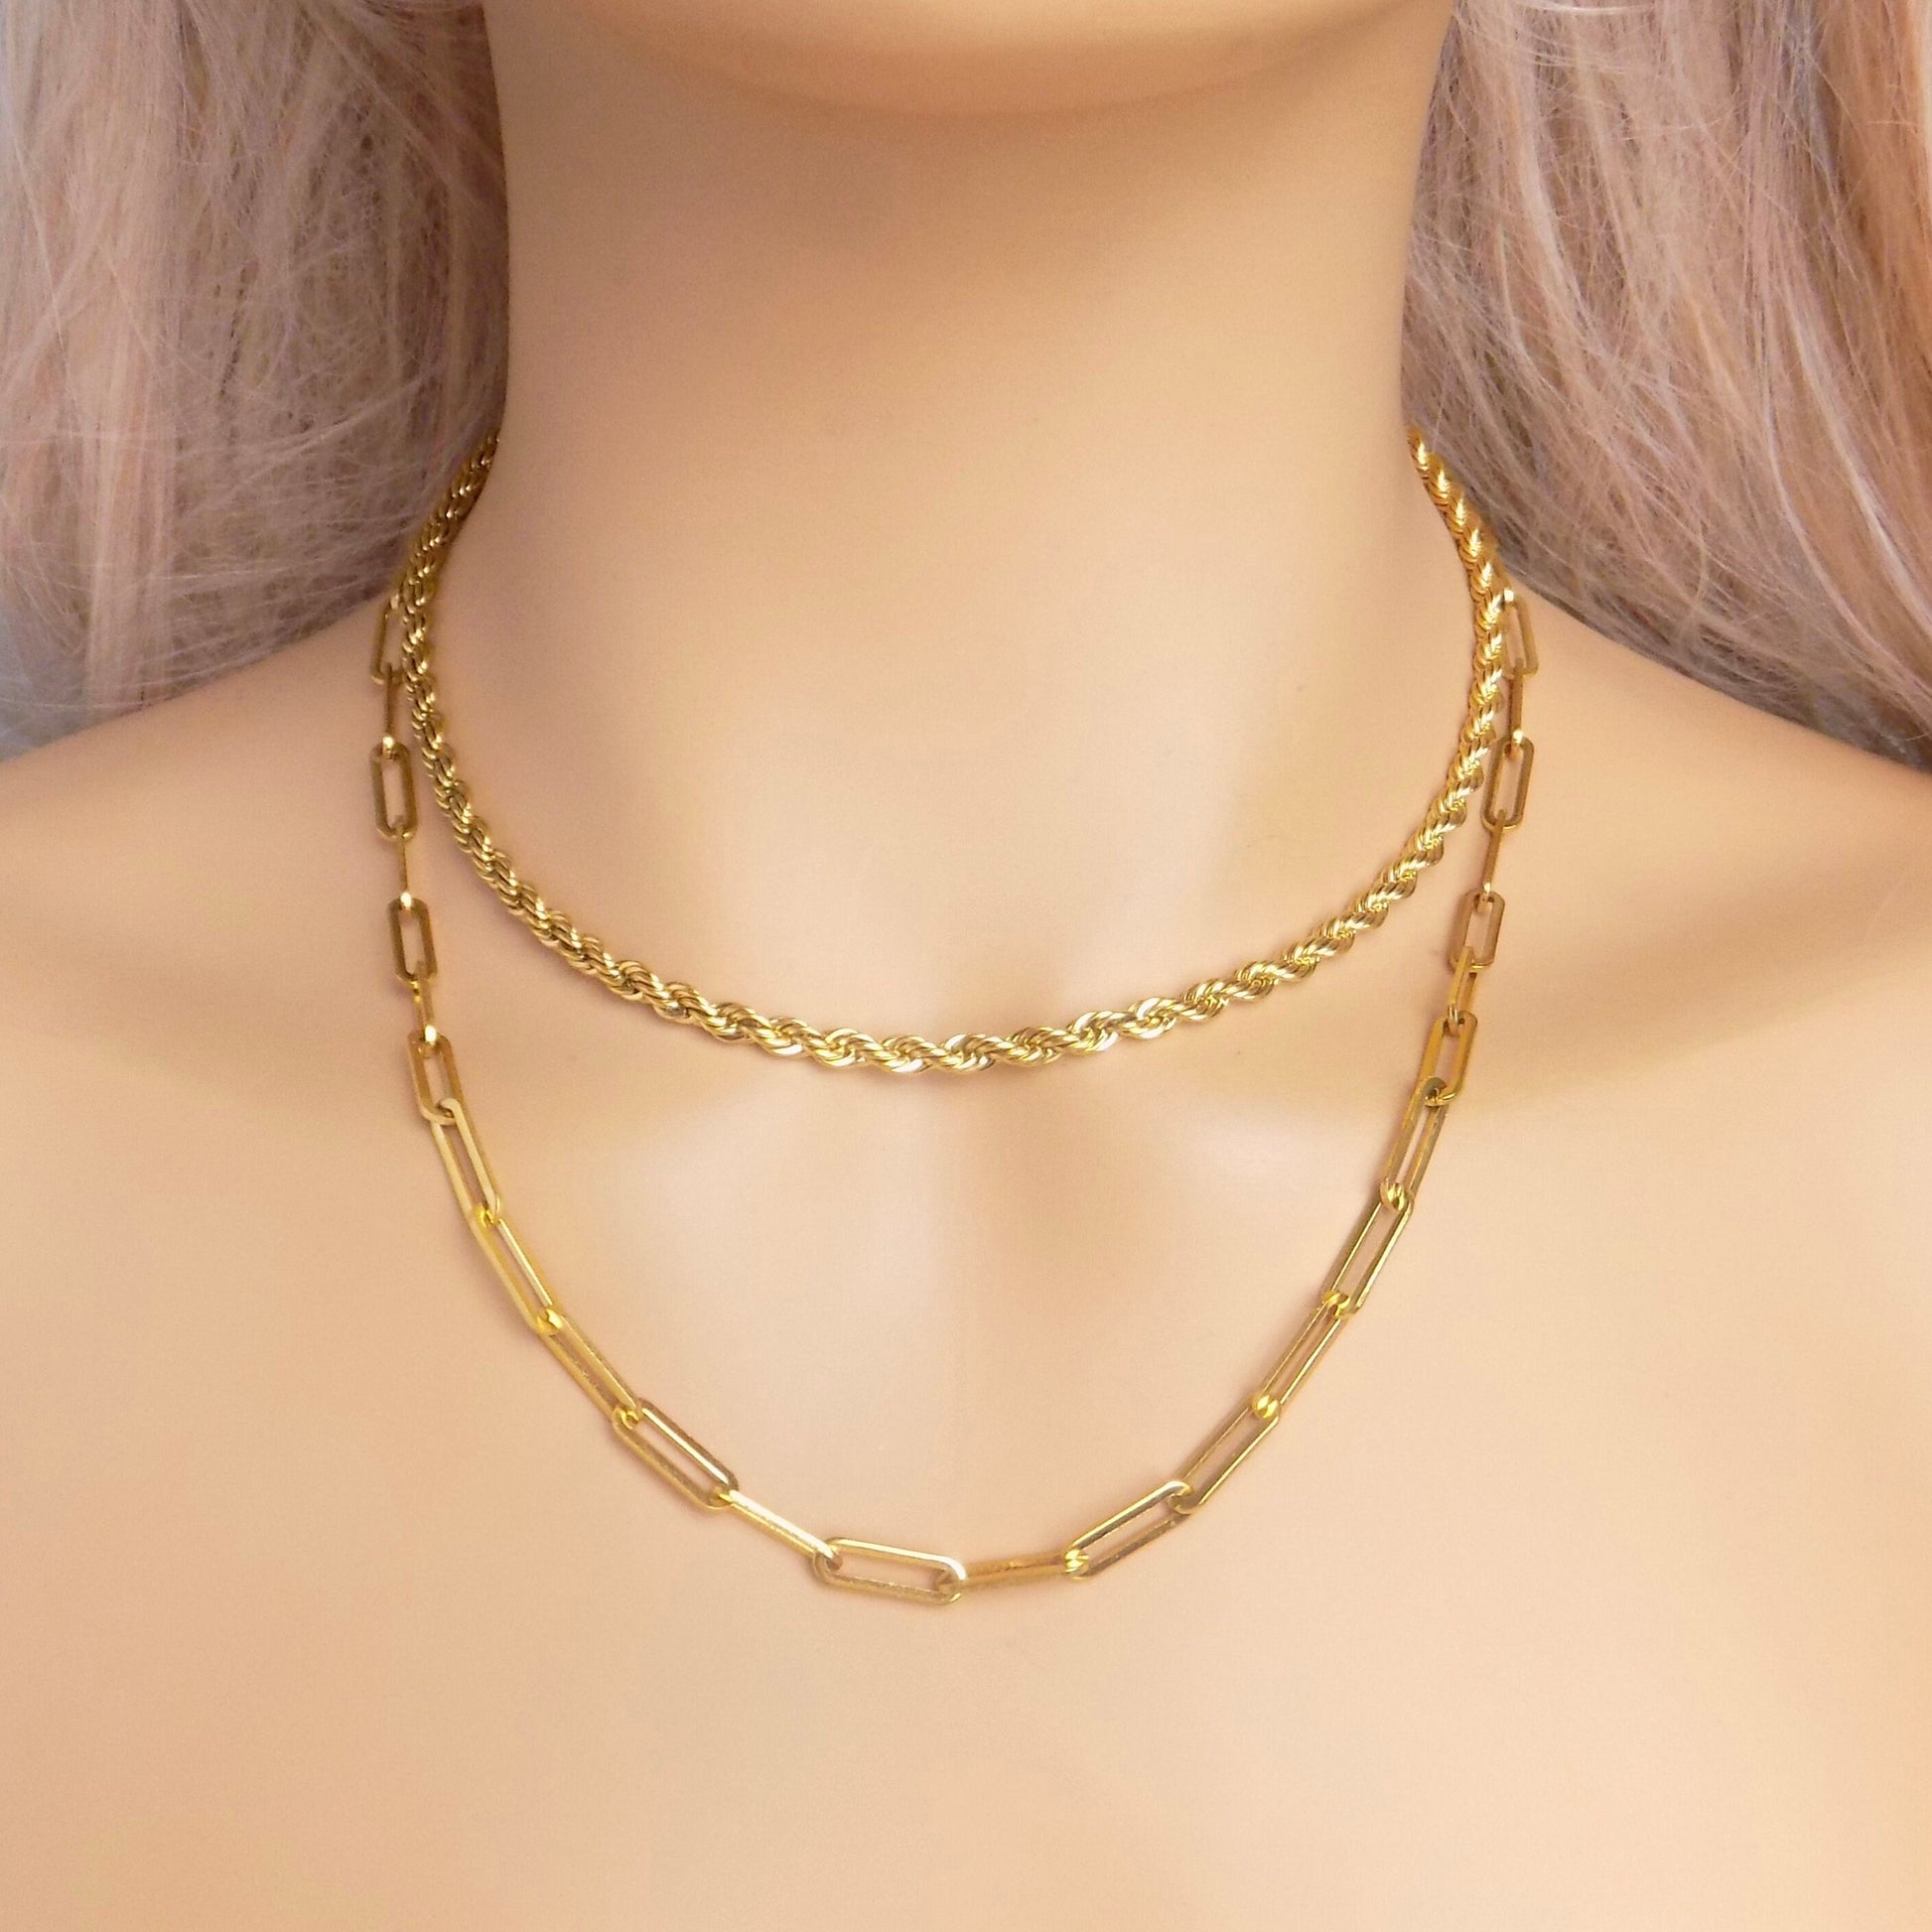 Gold Chunky Necklaces For Women, 18K Gold Stainless Steel Chain, Twist Rope, Paperclip Chain, Finished Chains, Made to Order, M7-76